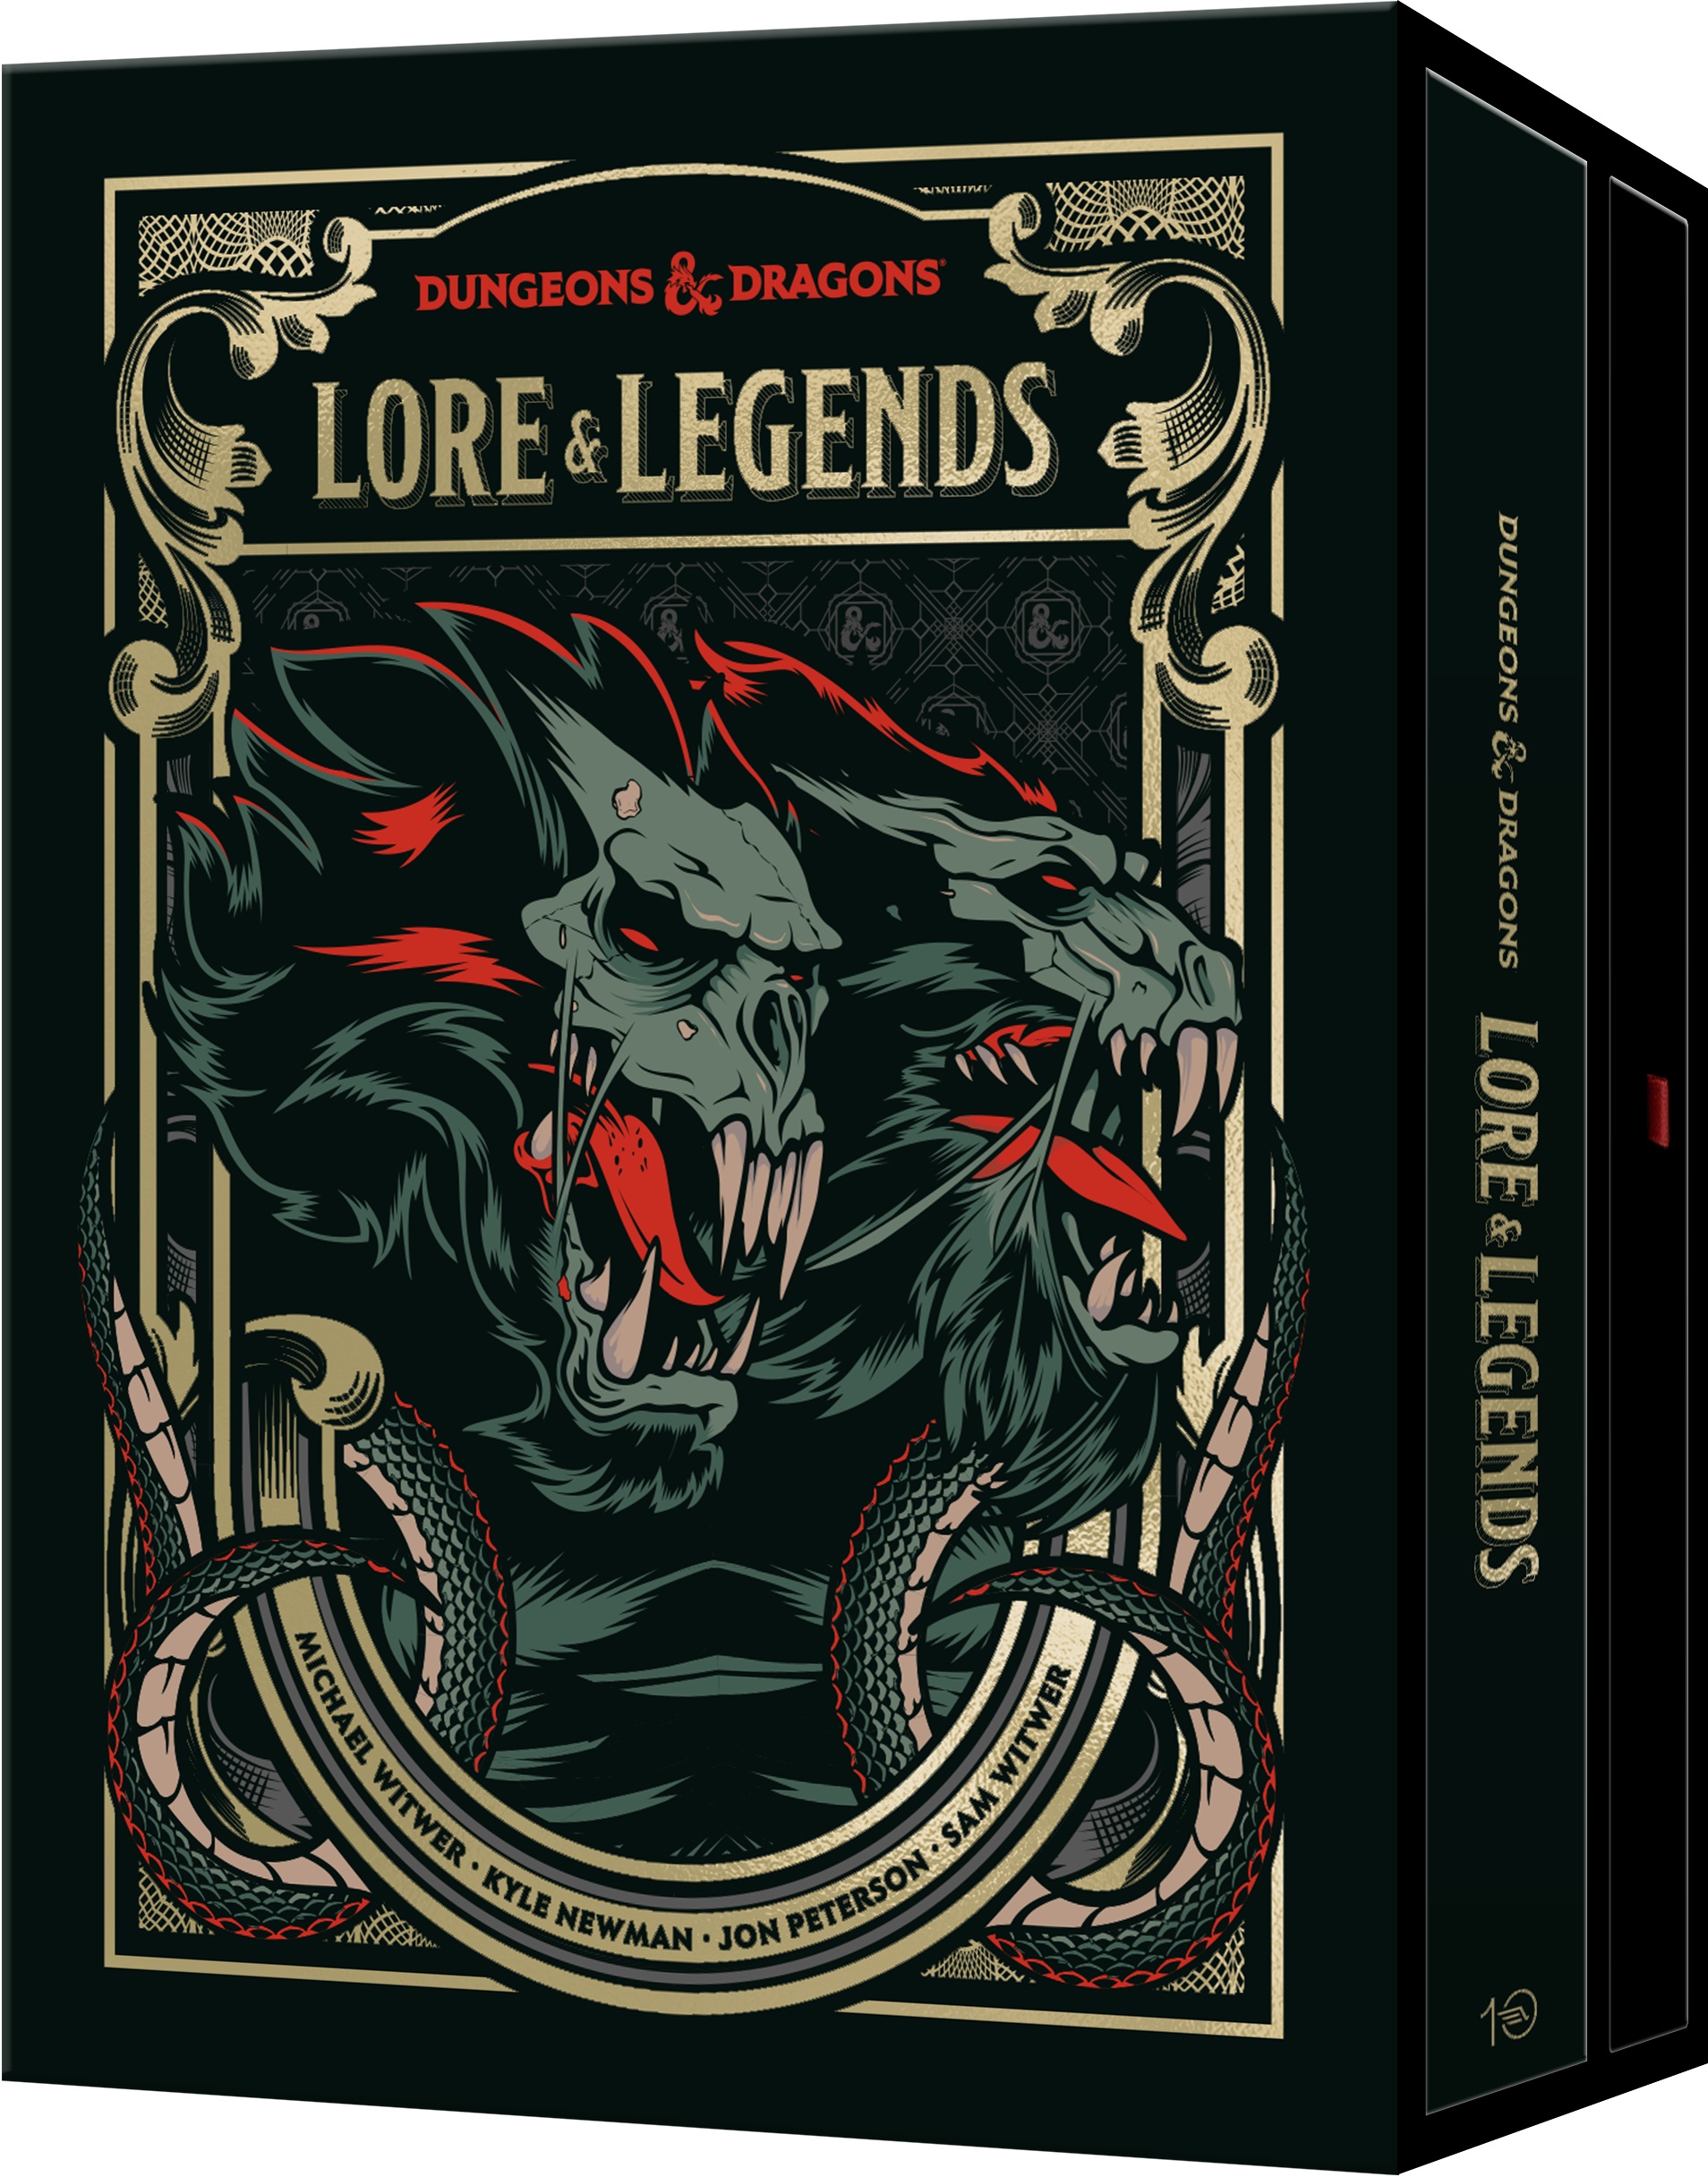 Dungeons & Dragons (5th Ed.): Lore and Legends Special Edition Boxed Set 